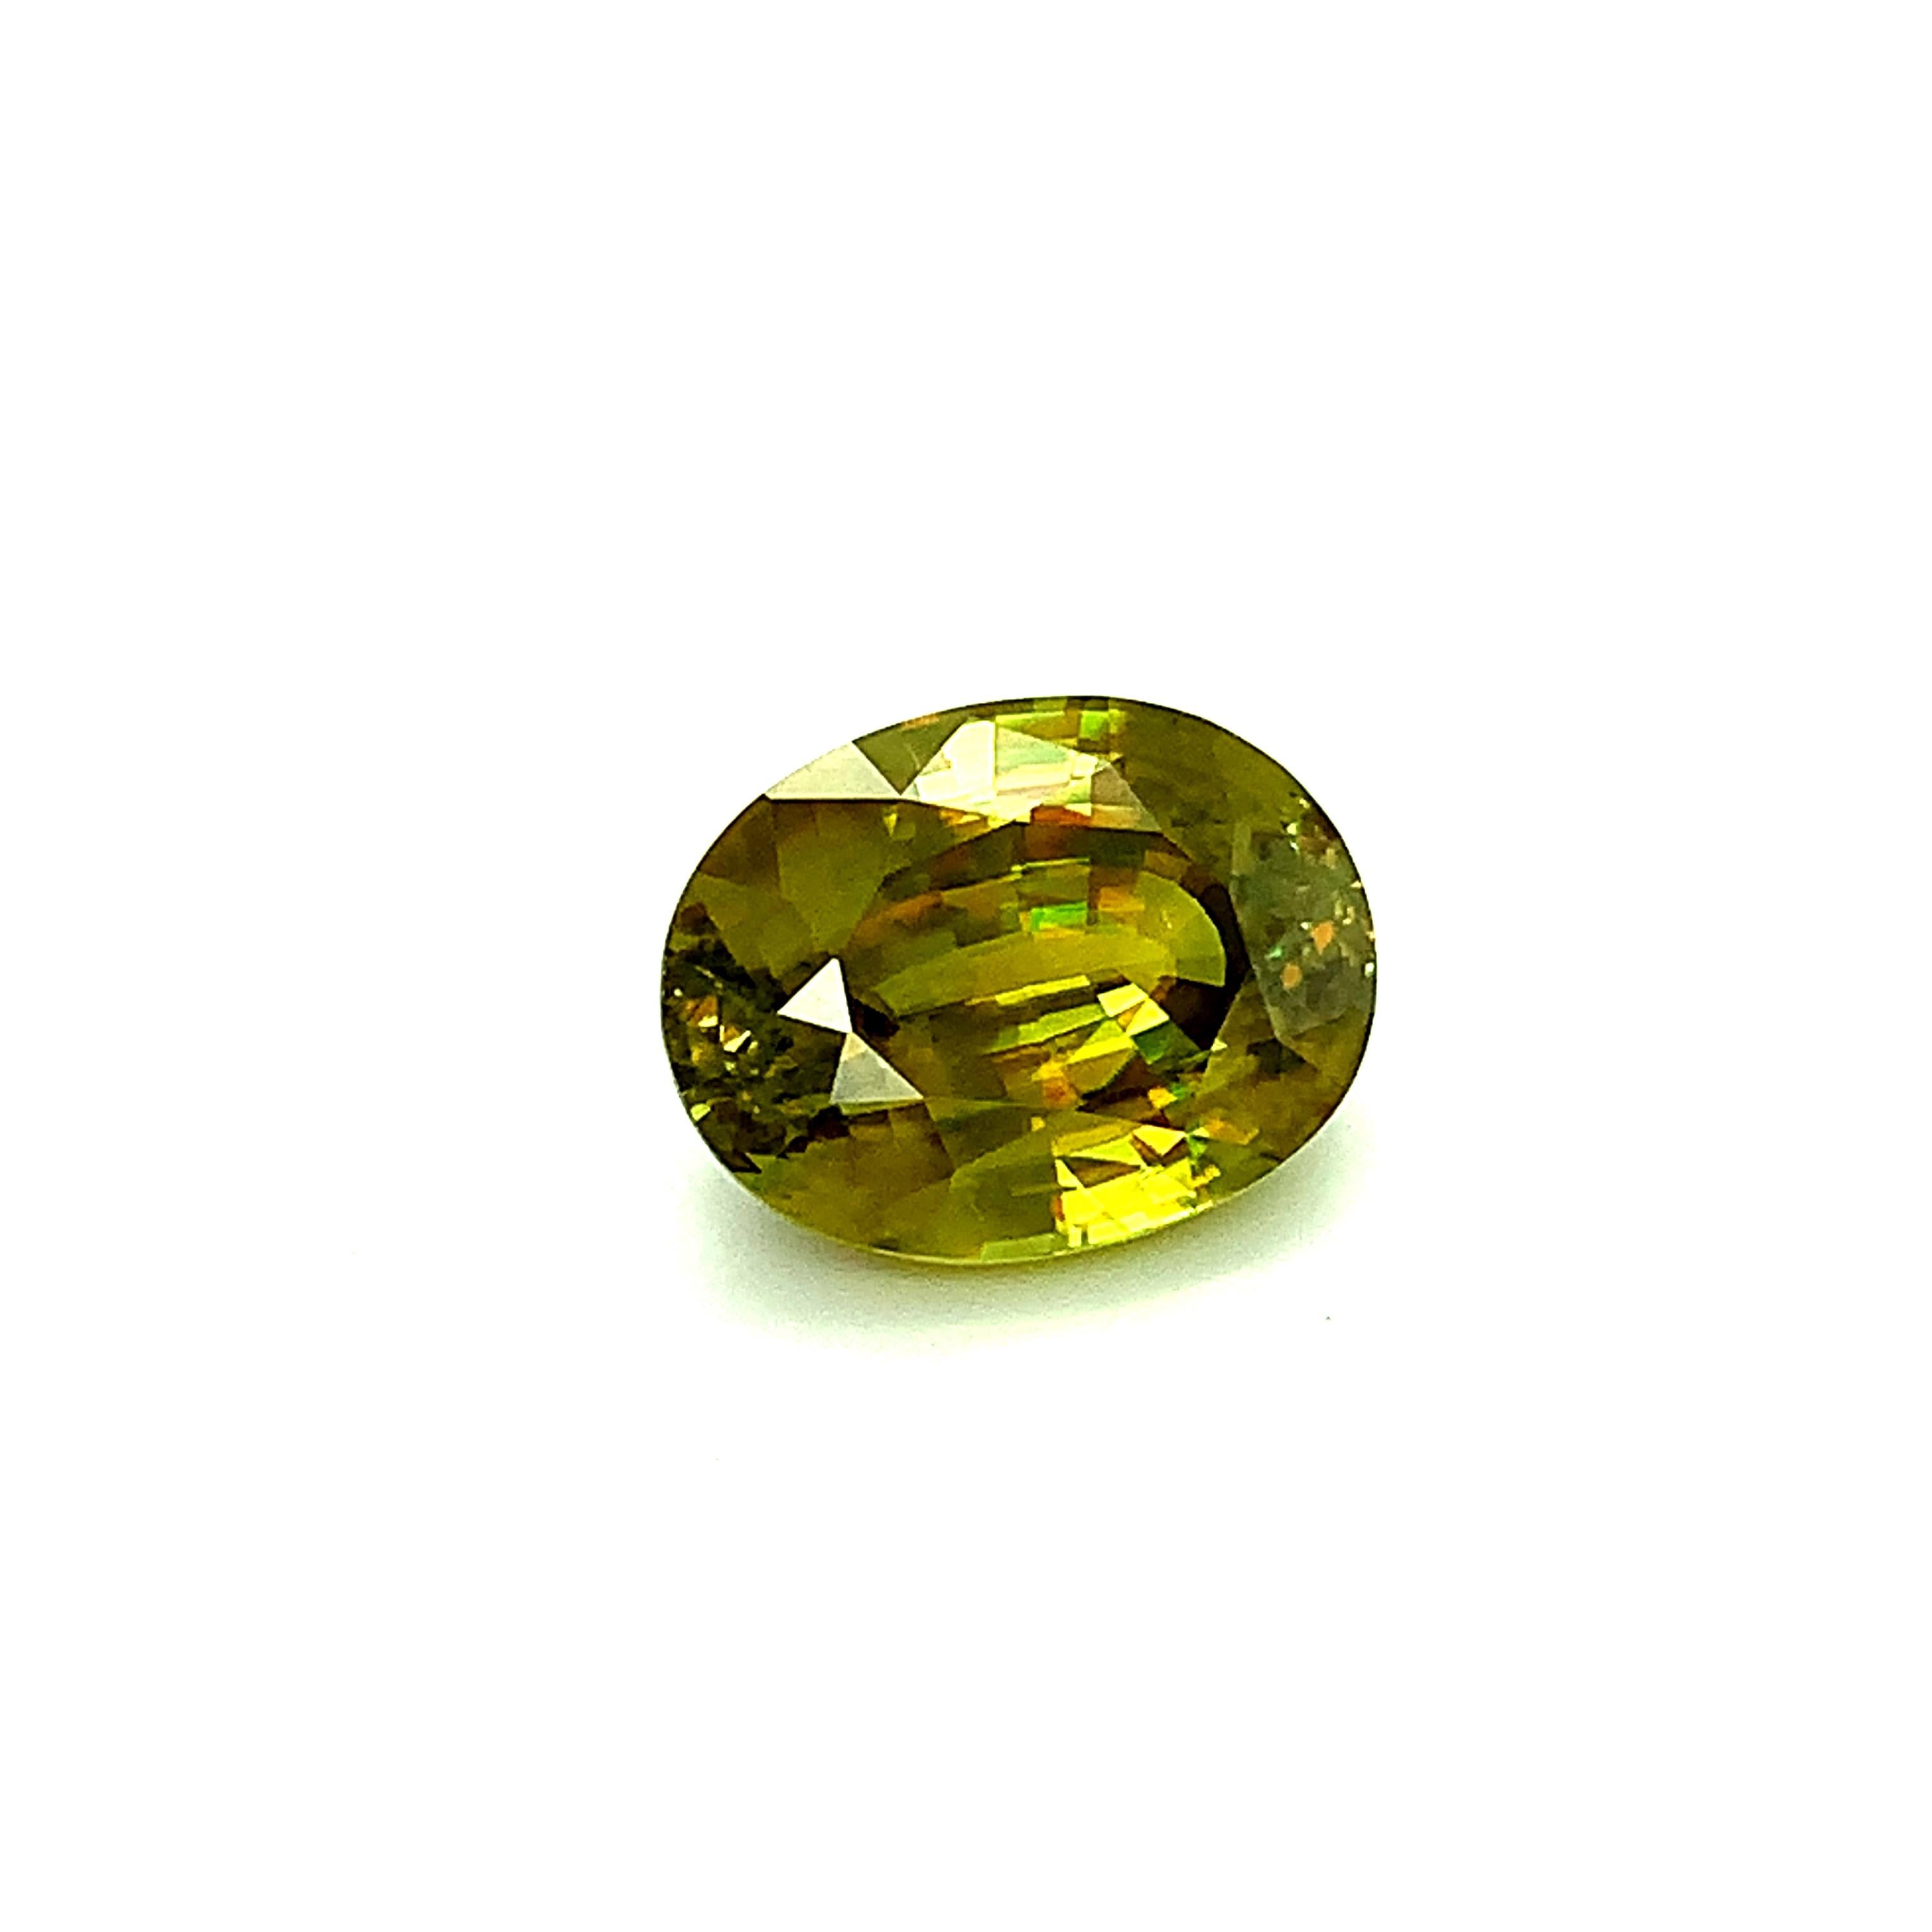 For anyone searching for an unusual gem, this is it! Sphene is a unique, extraordinary mineral, with beautiful and unparalleled 